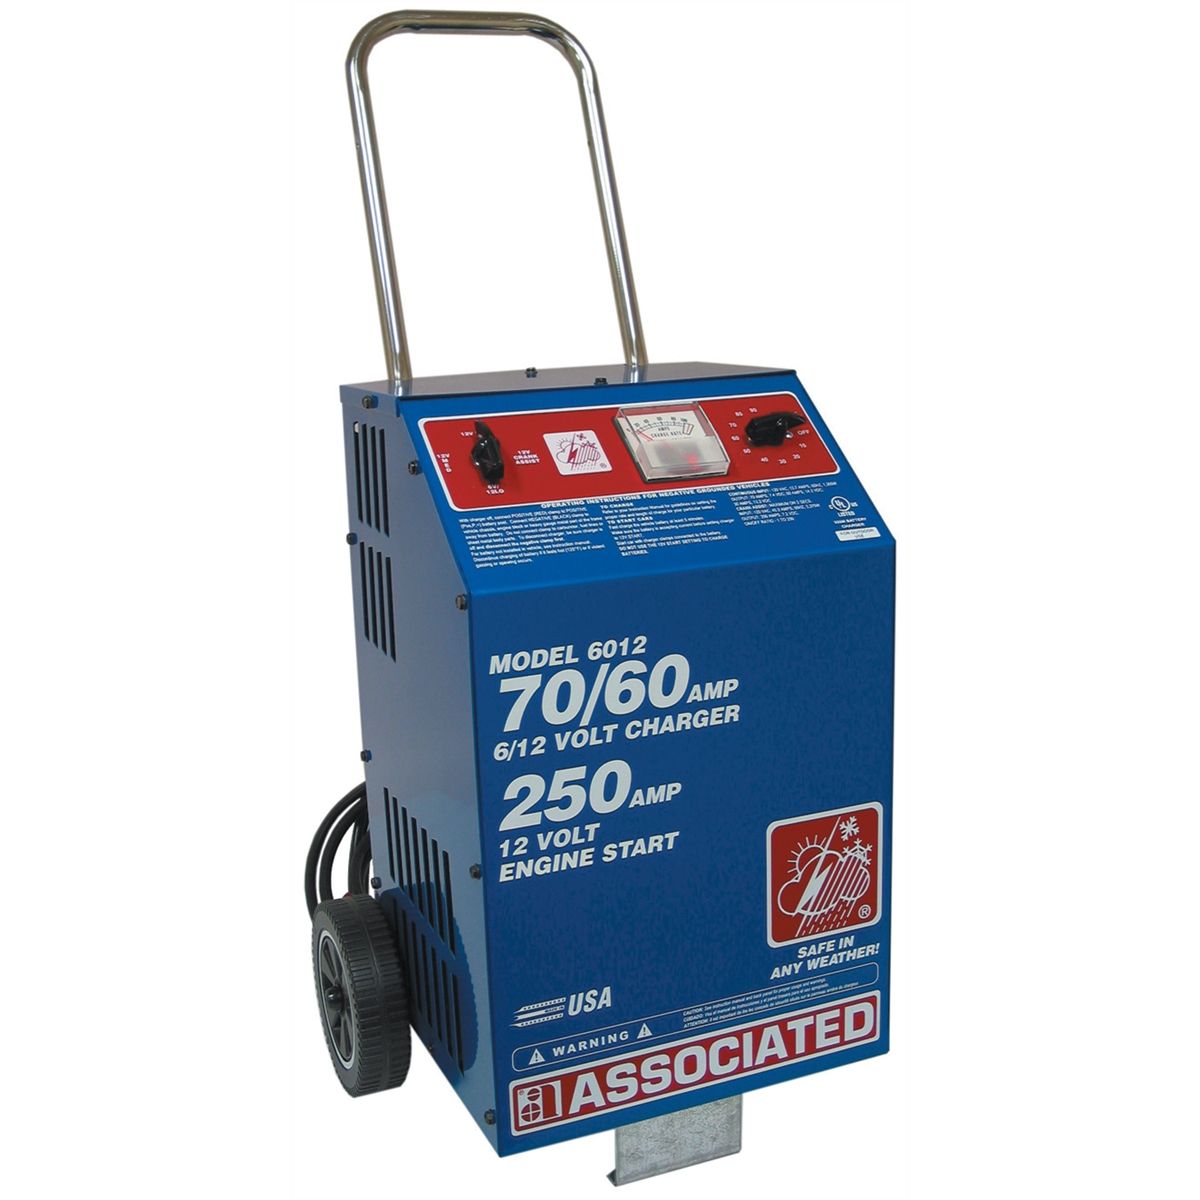 Professional Fast Charger - 6/12 Volt, 70/60AMP